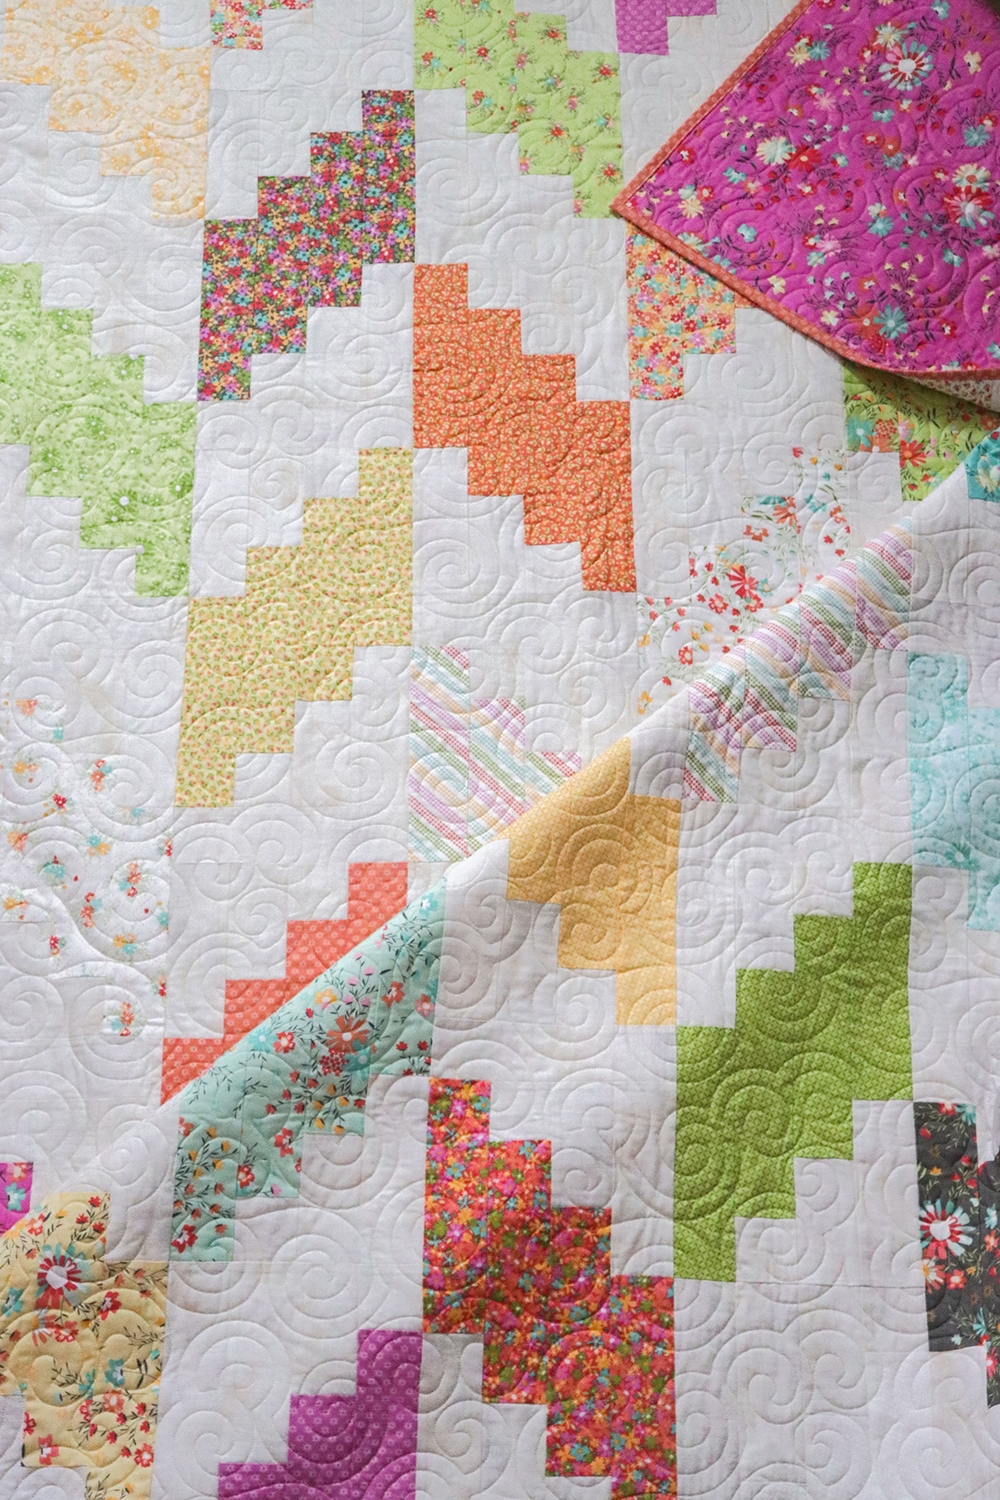 Marbled Cheesecake quilt by Lella Boutique. Pattern found in the book: Jelly Filled - 18 Quilts from 2 1/2" Strips. Fabric is Sunnyside Up by Corey Yoder for Moda Fabrics